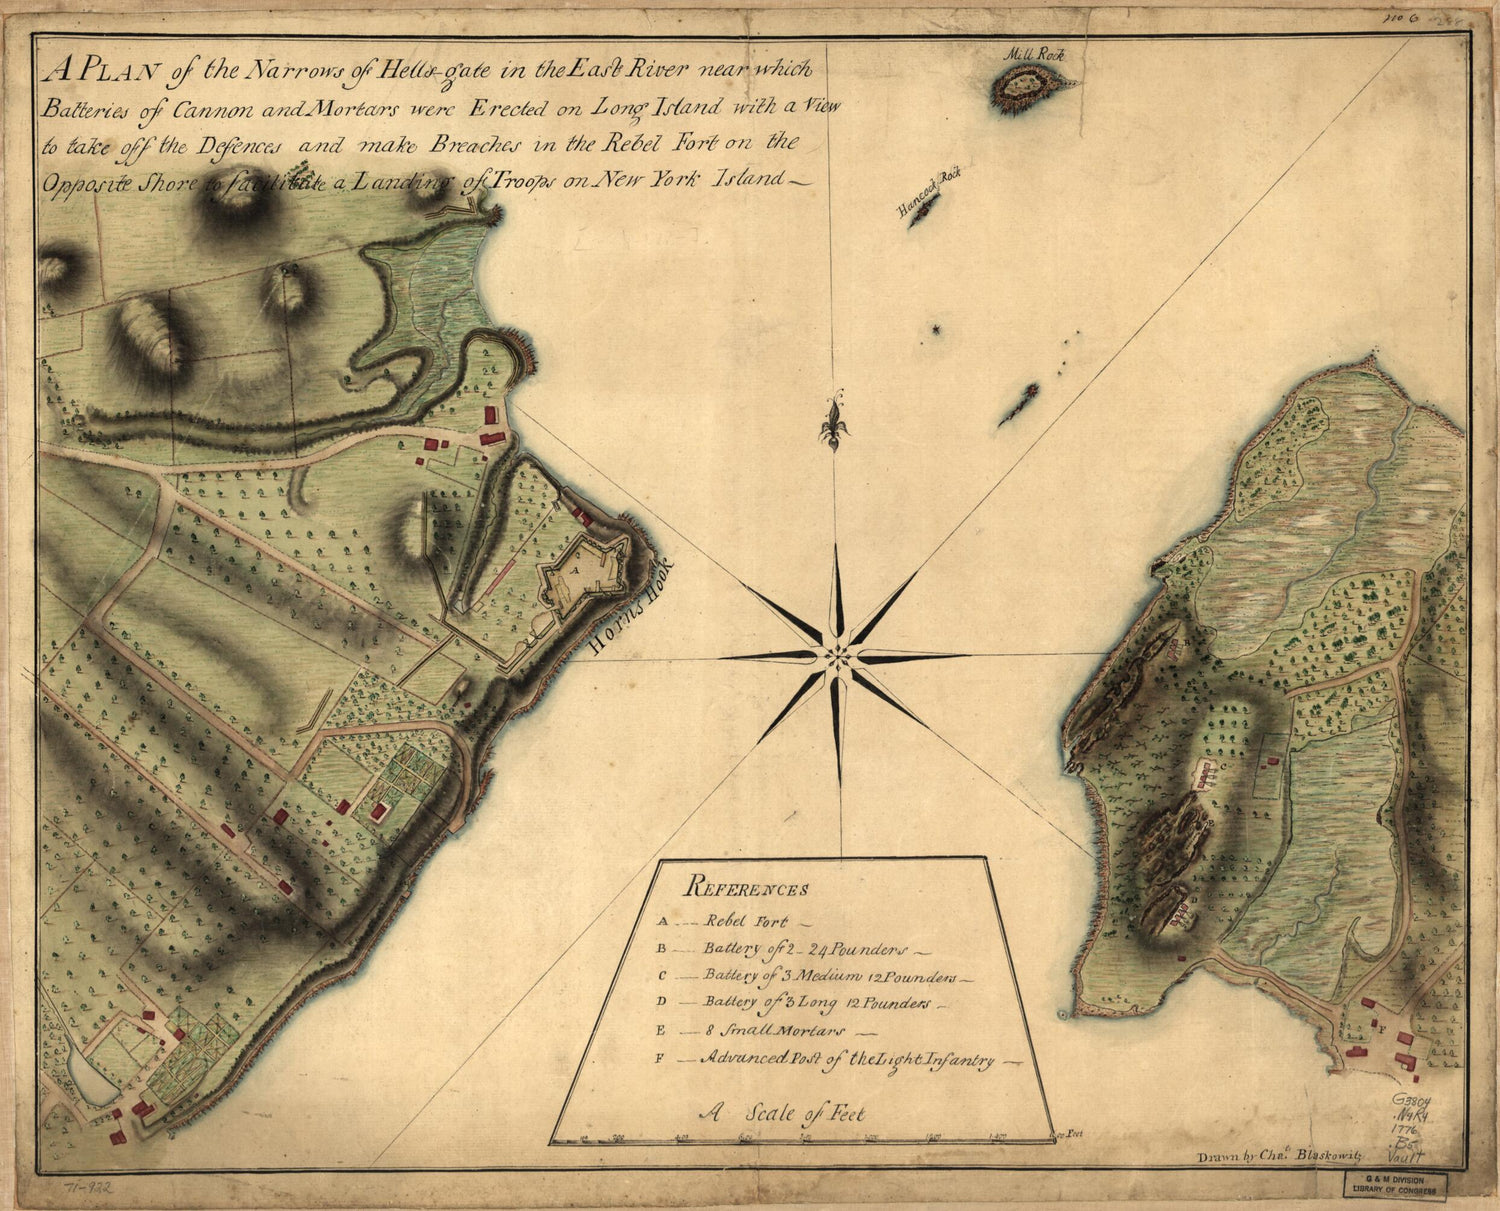 This old map of Gate In the East River, Near Which Batteries of Cannon and Mortars Were Erected On Long Island With a View to Take Off the Defences and Make Breaches In the Rebel Fort On the Opposite Shore to Facilitate a Landing of Troops On New York Is